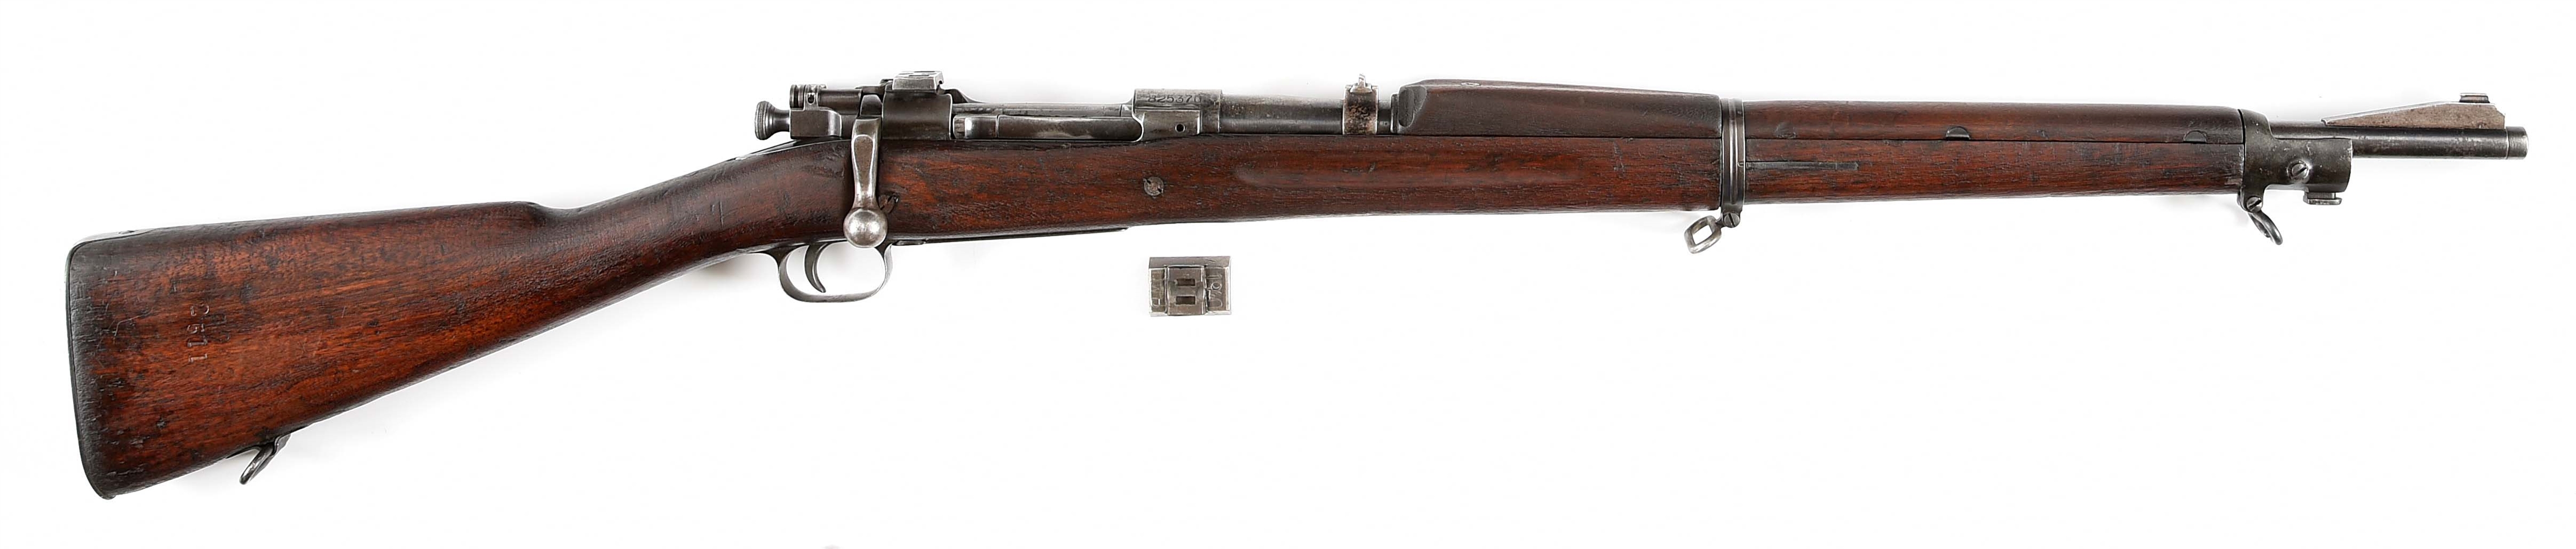 (C) SPRINGFIELD 1903 BOLT ACTION RIFLE WITH UNUSUAL CHARACTERISTICS.